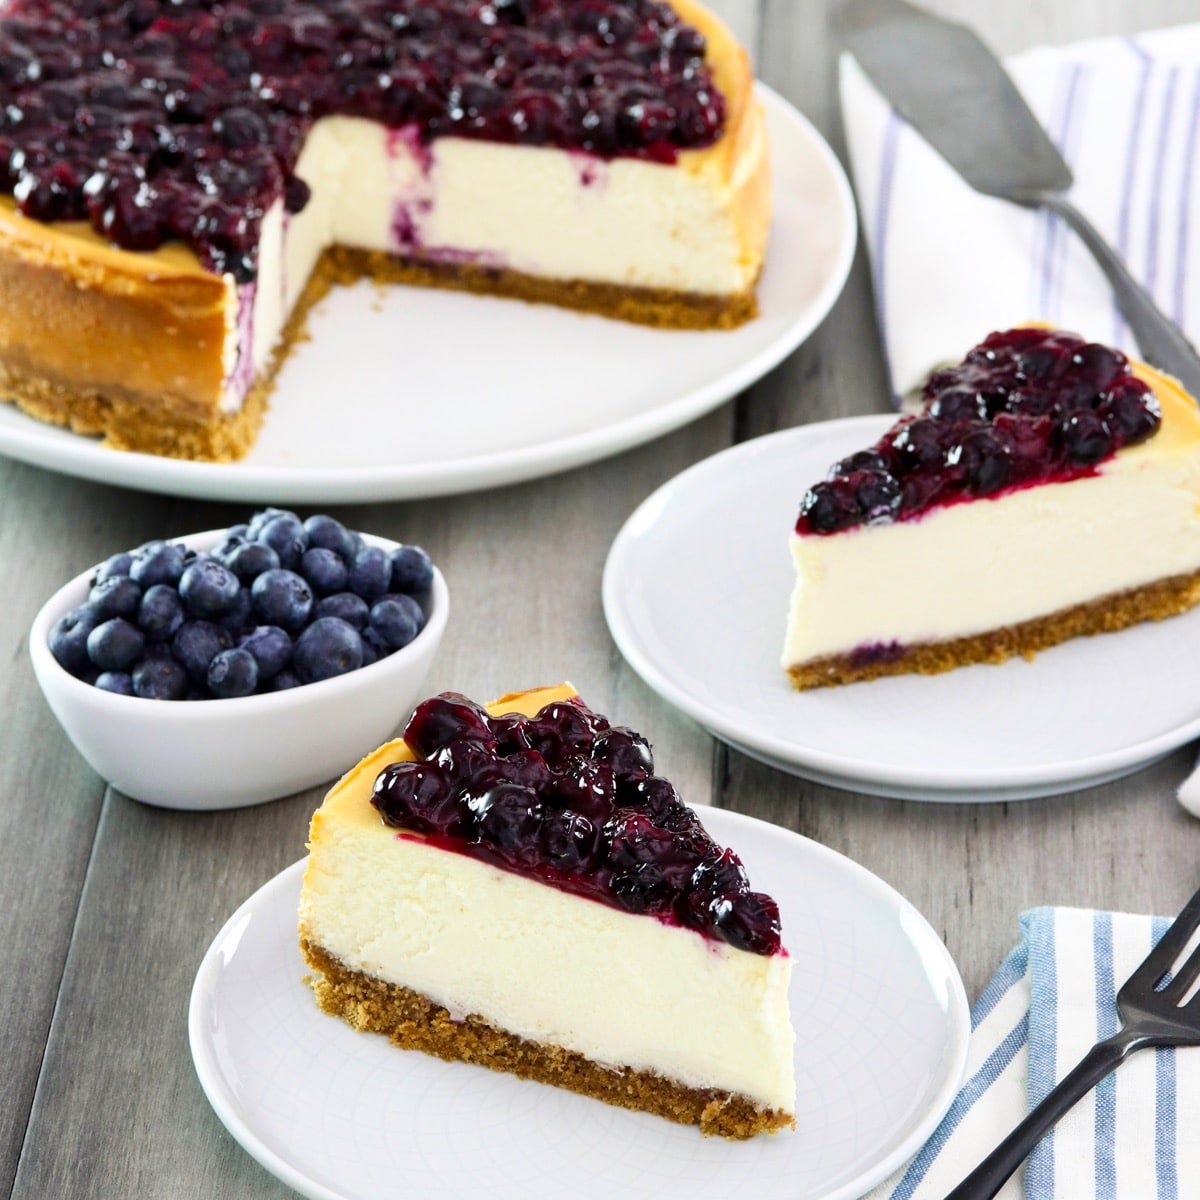 Square crop - two slices of cheesecake on plates with fresh blueberries beside them, a whole cheesecake with slices cut out and pie server in background.